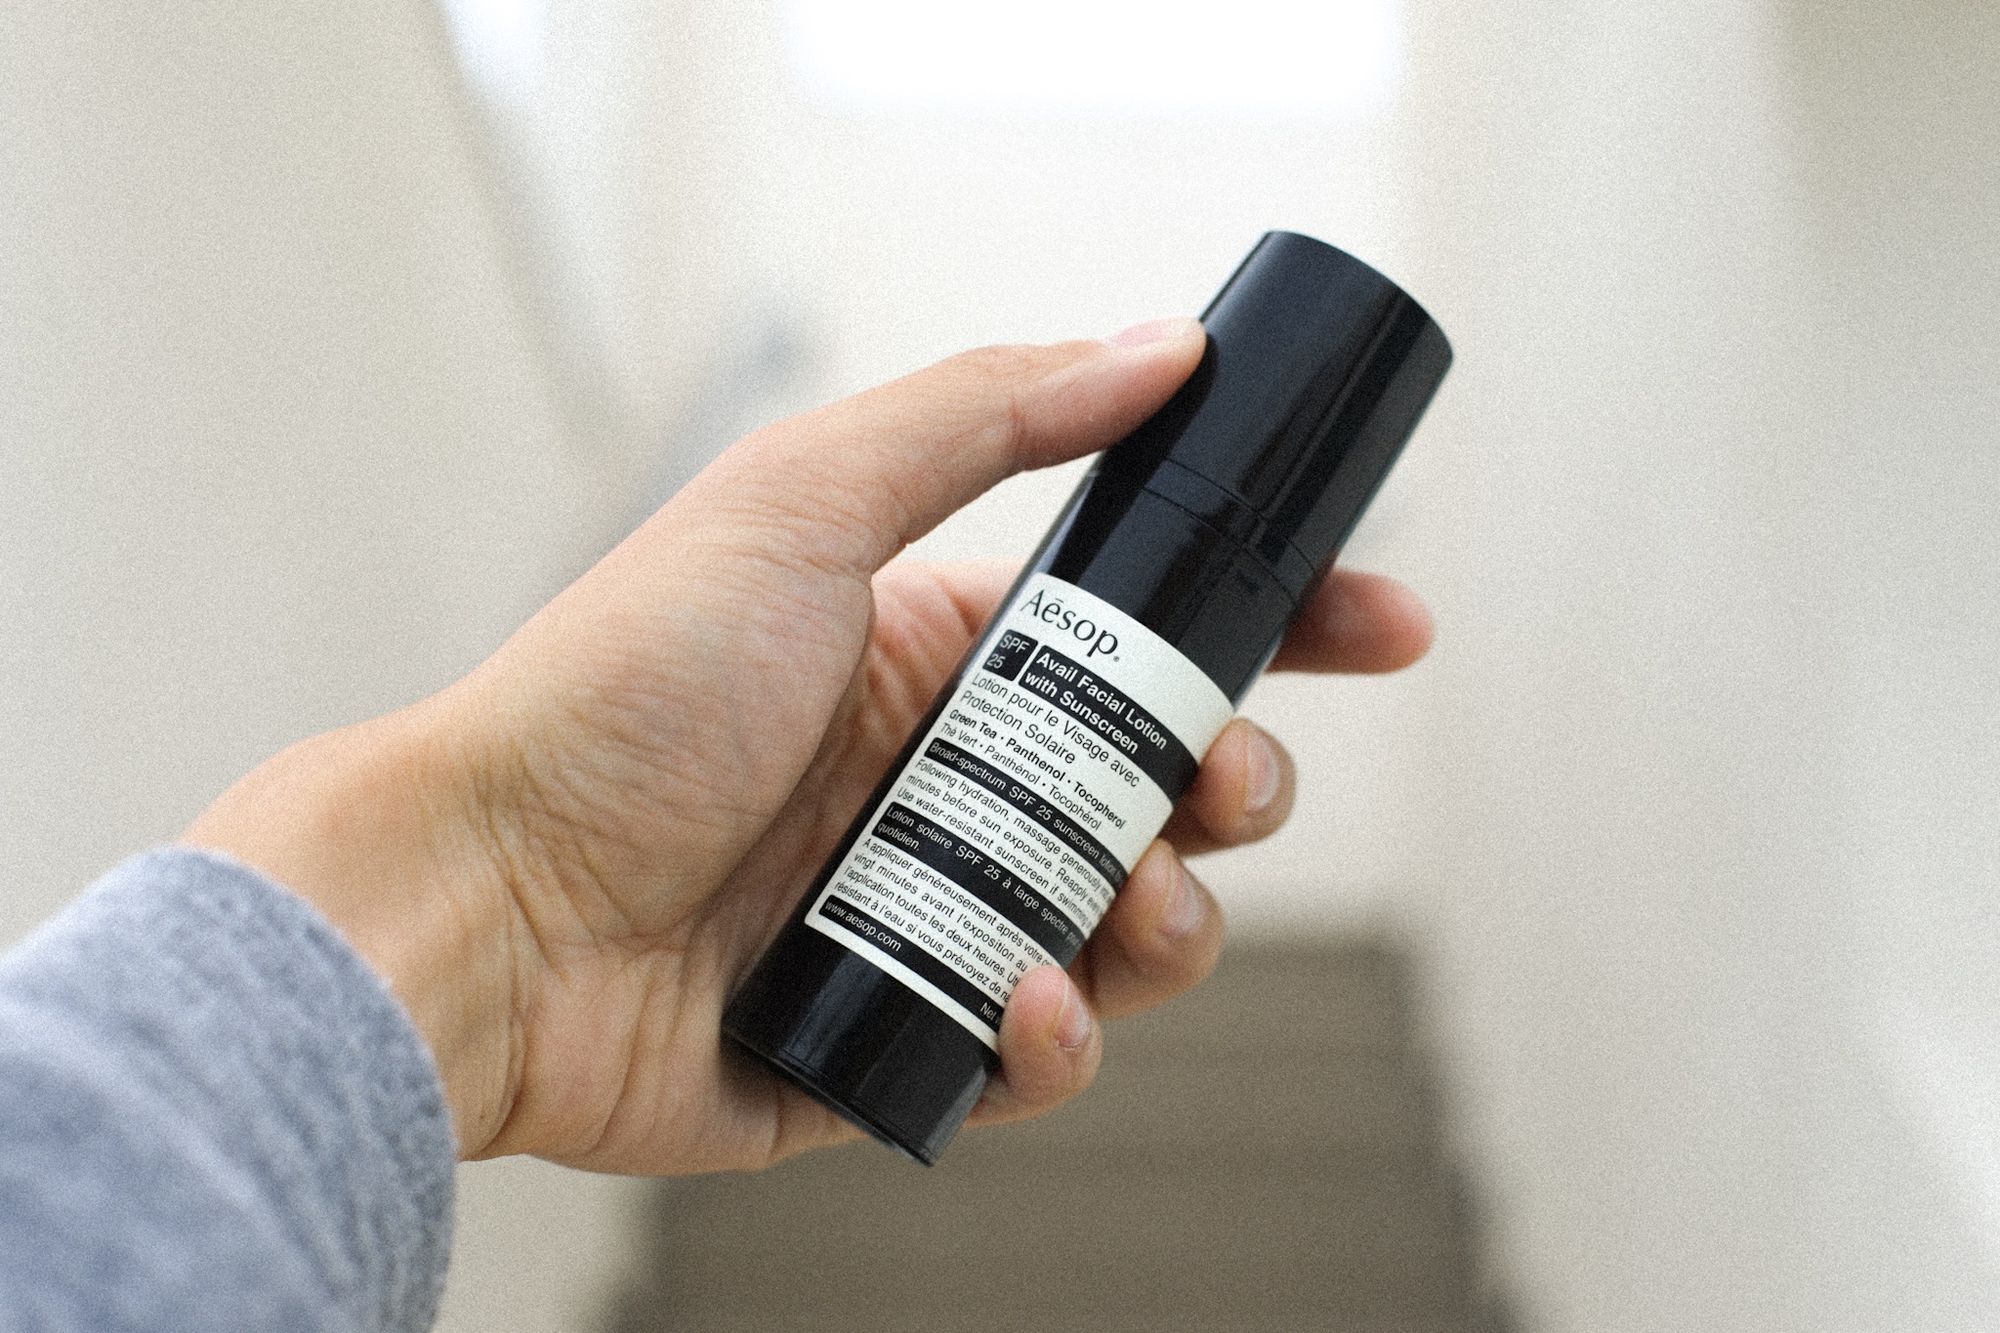 Aesop newest sunscreen took 3 years formulate, here's what we think